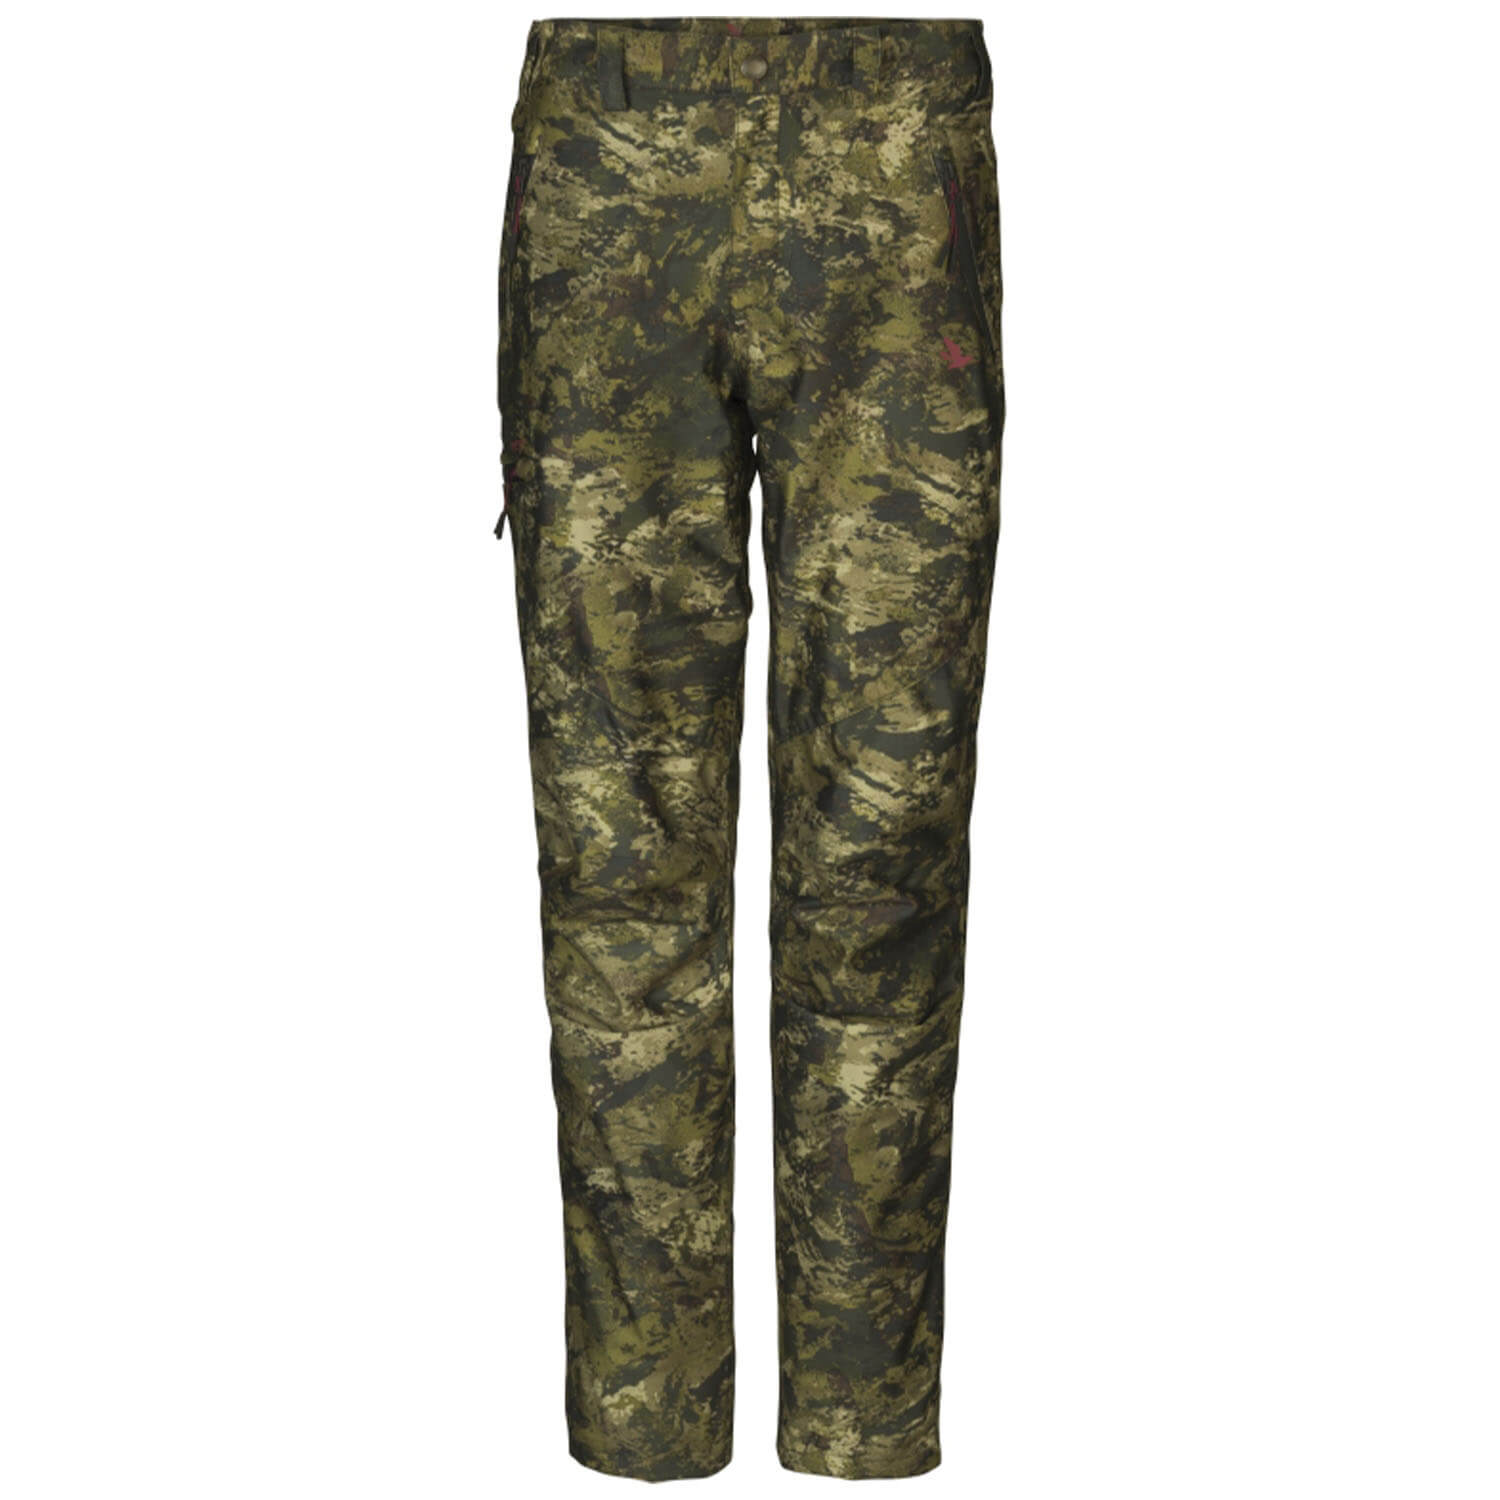 Seeland ladys hunting pants avail (InVis) - Shop by Activity